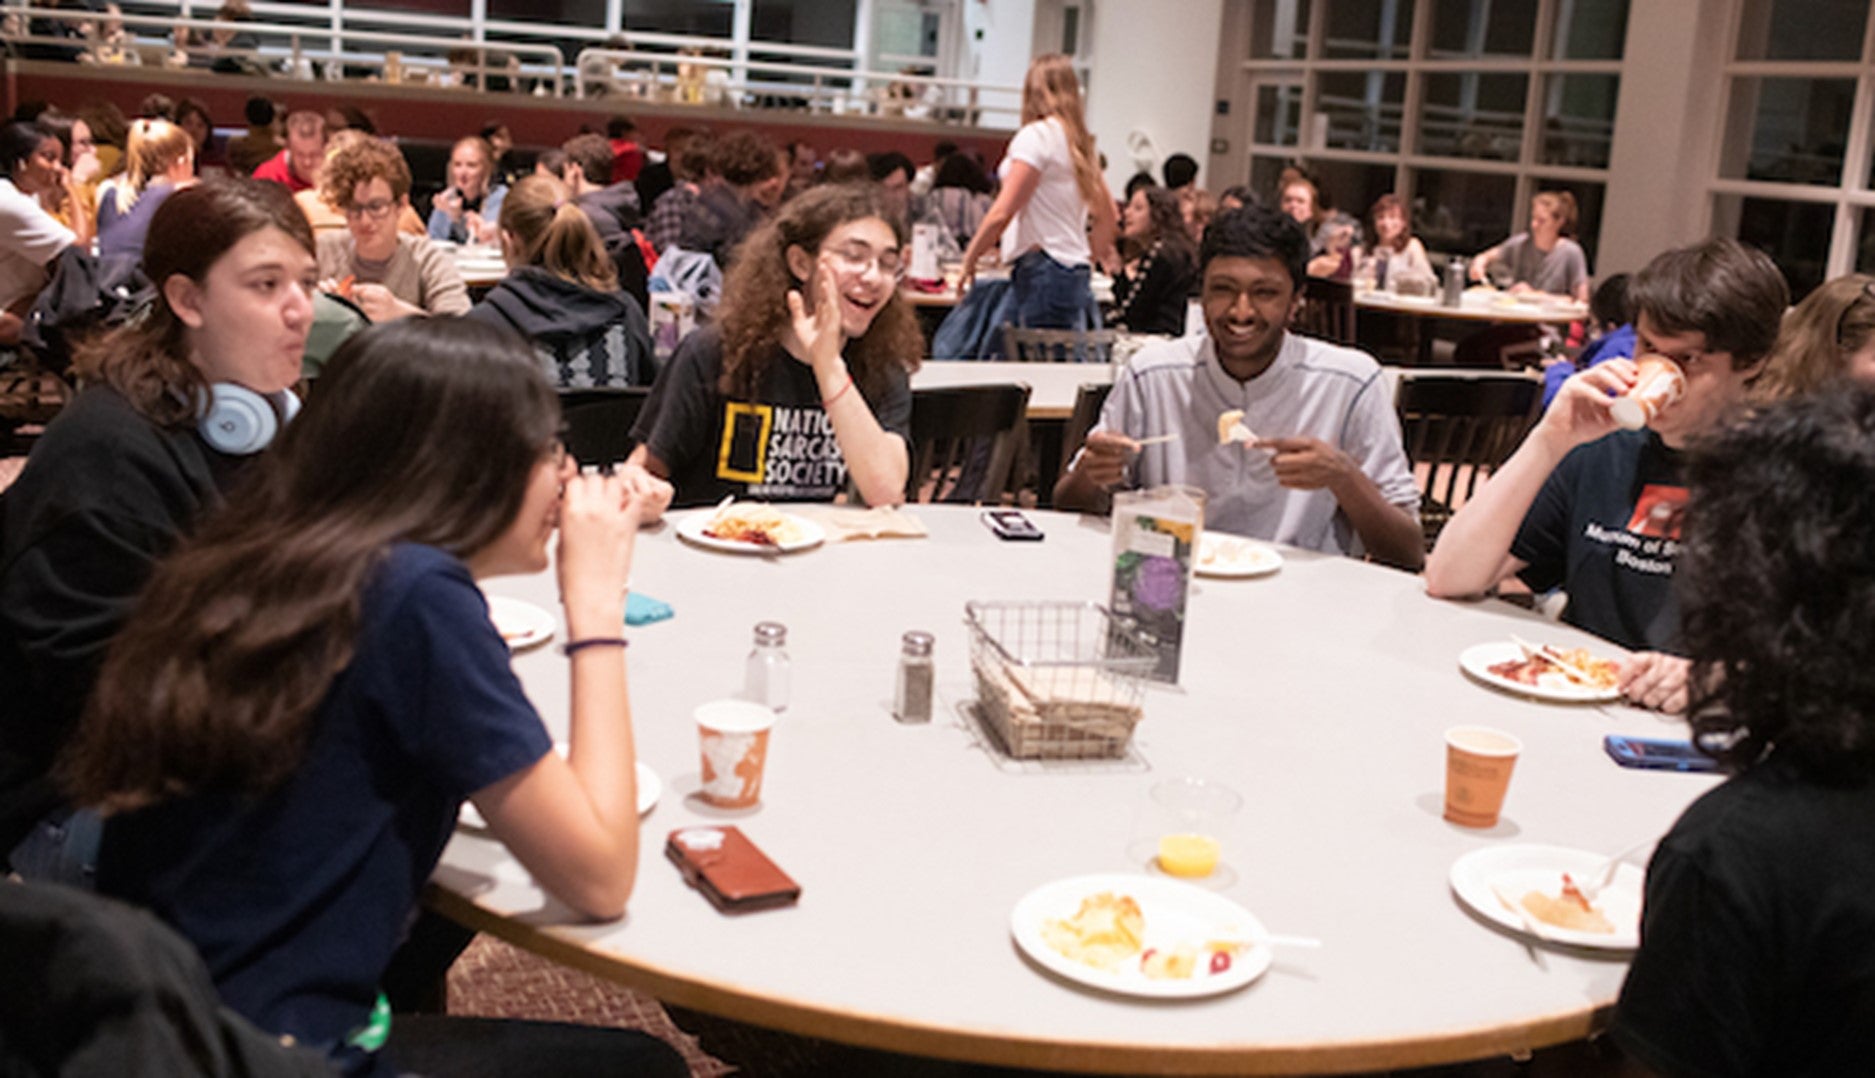 Students eating in a dining hall